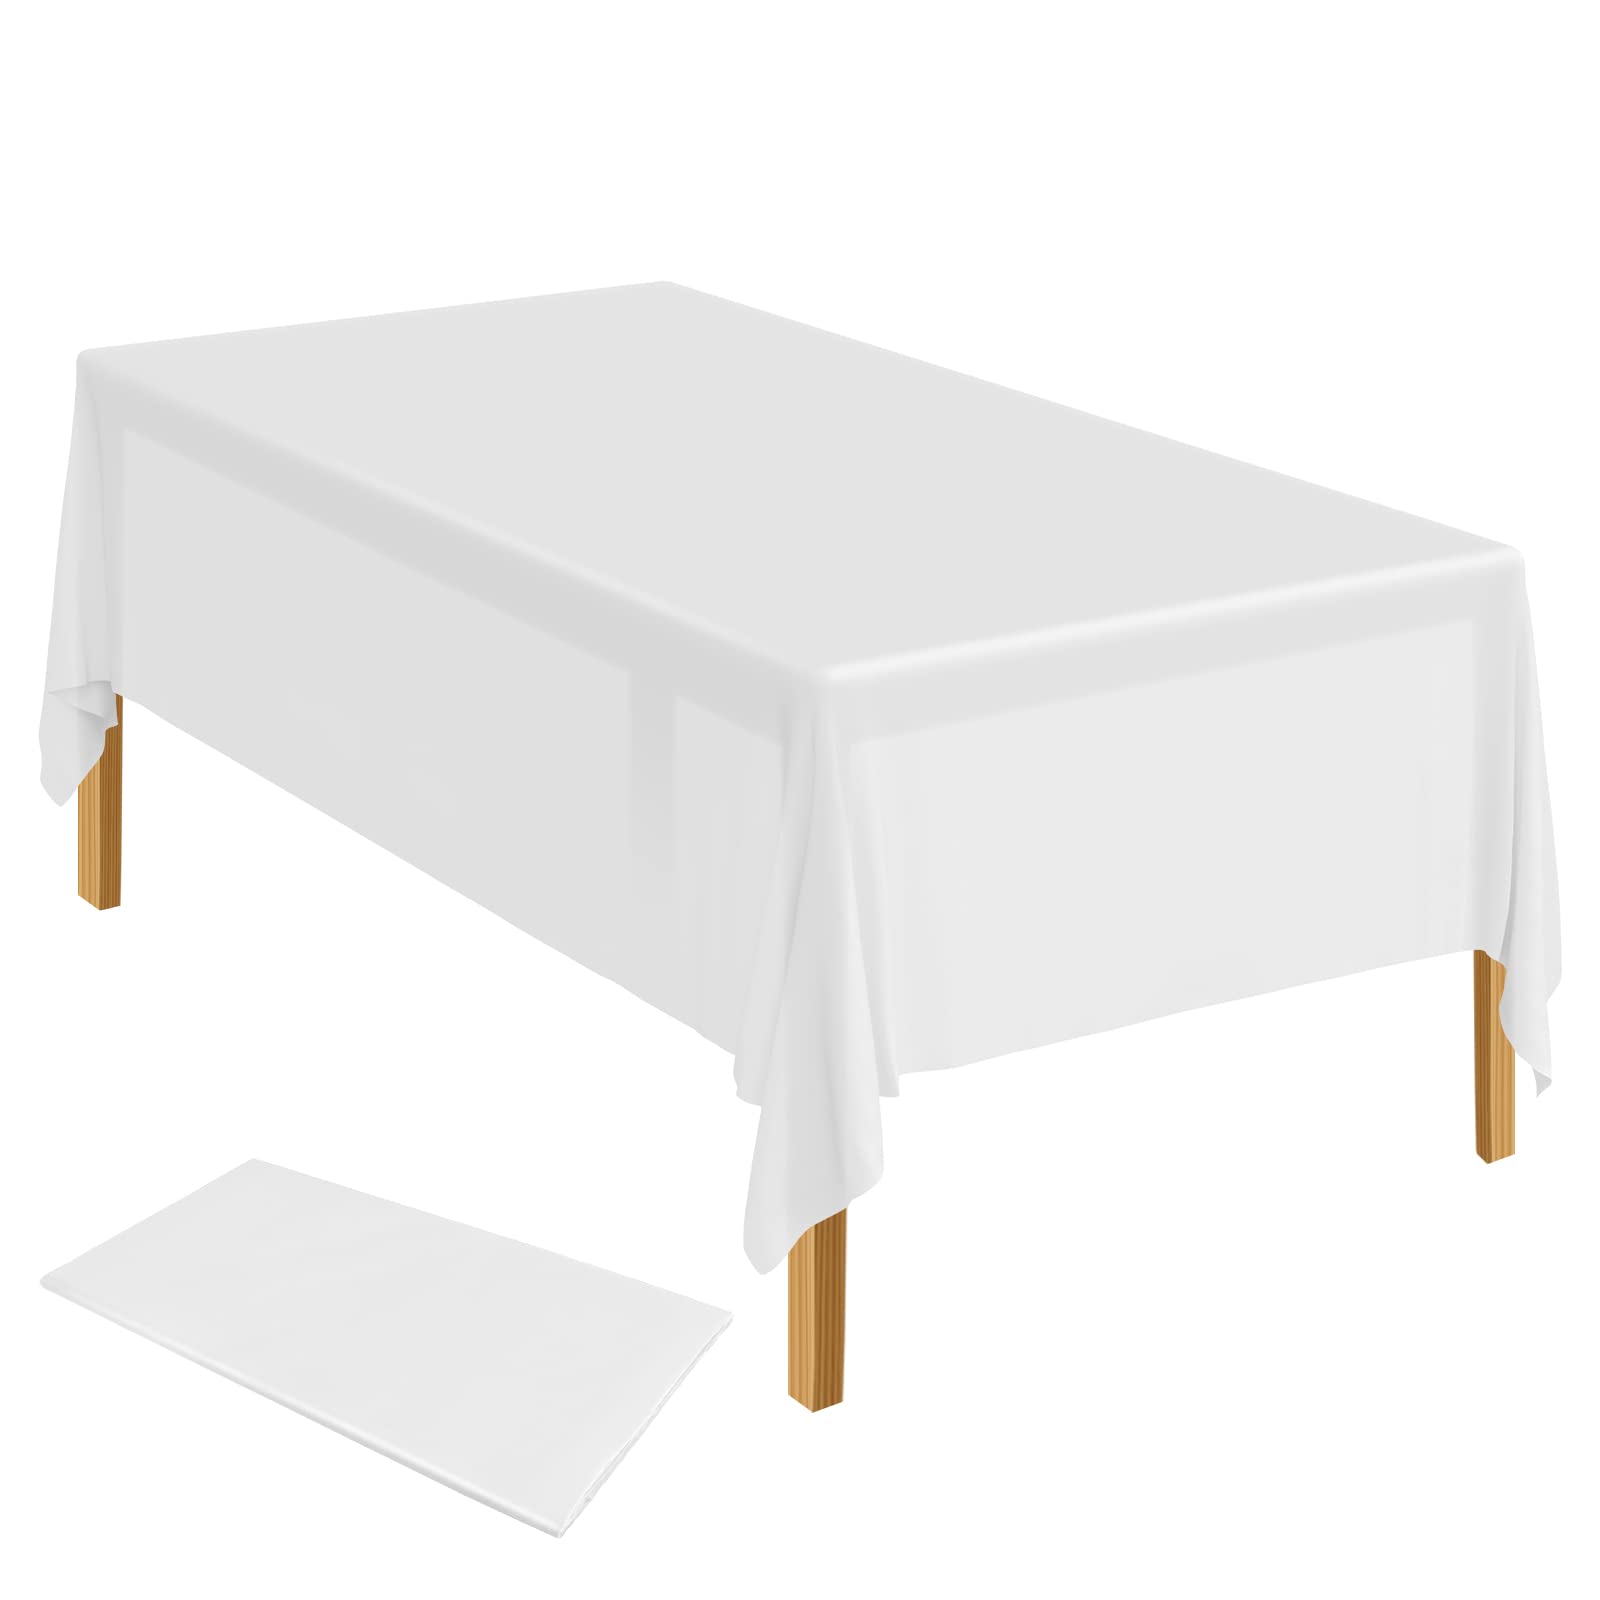 ELECLAND Plastic Table Cover 137 x 274 cm Plastic Tablecloth Rectangle Table Covers for Indoor or Outdoor Baby Shower, Wedding, Birthday Party Decorations (1, White)